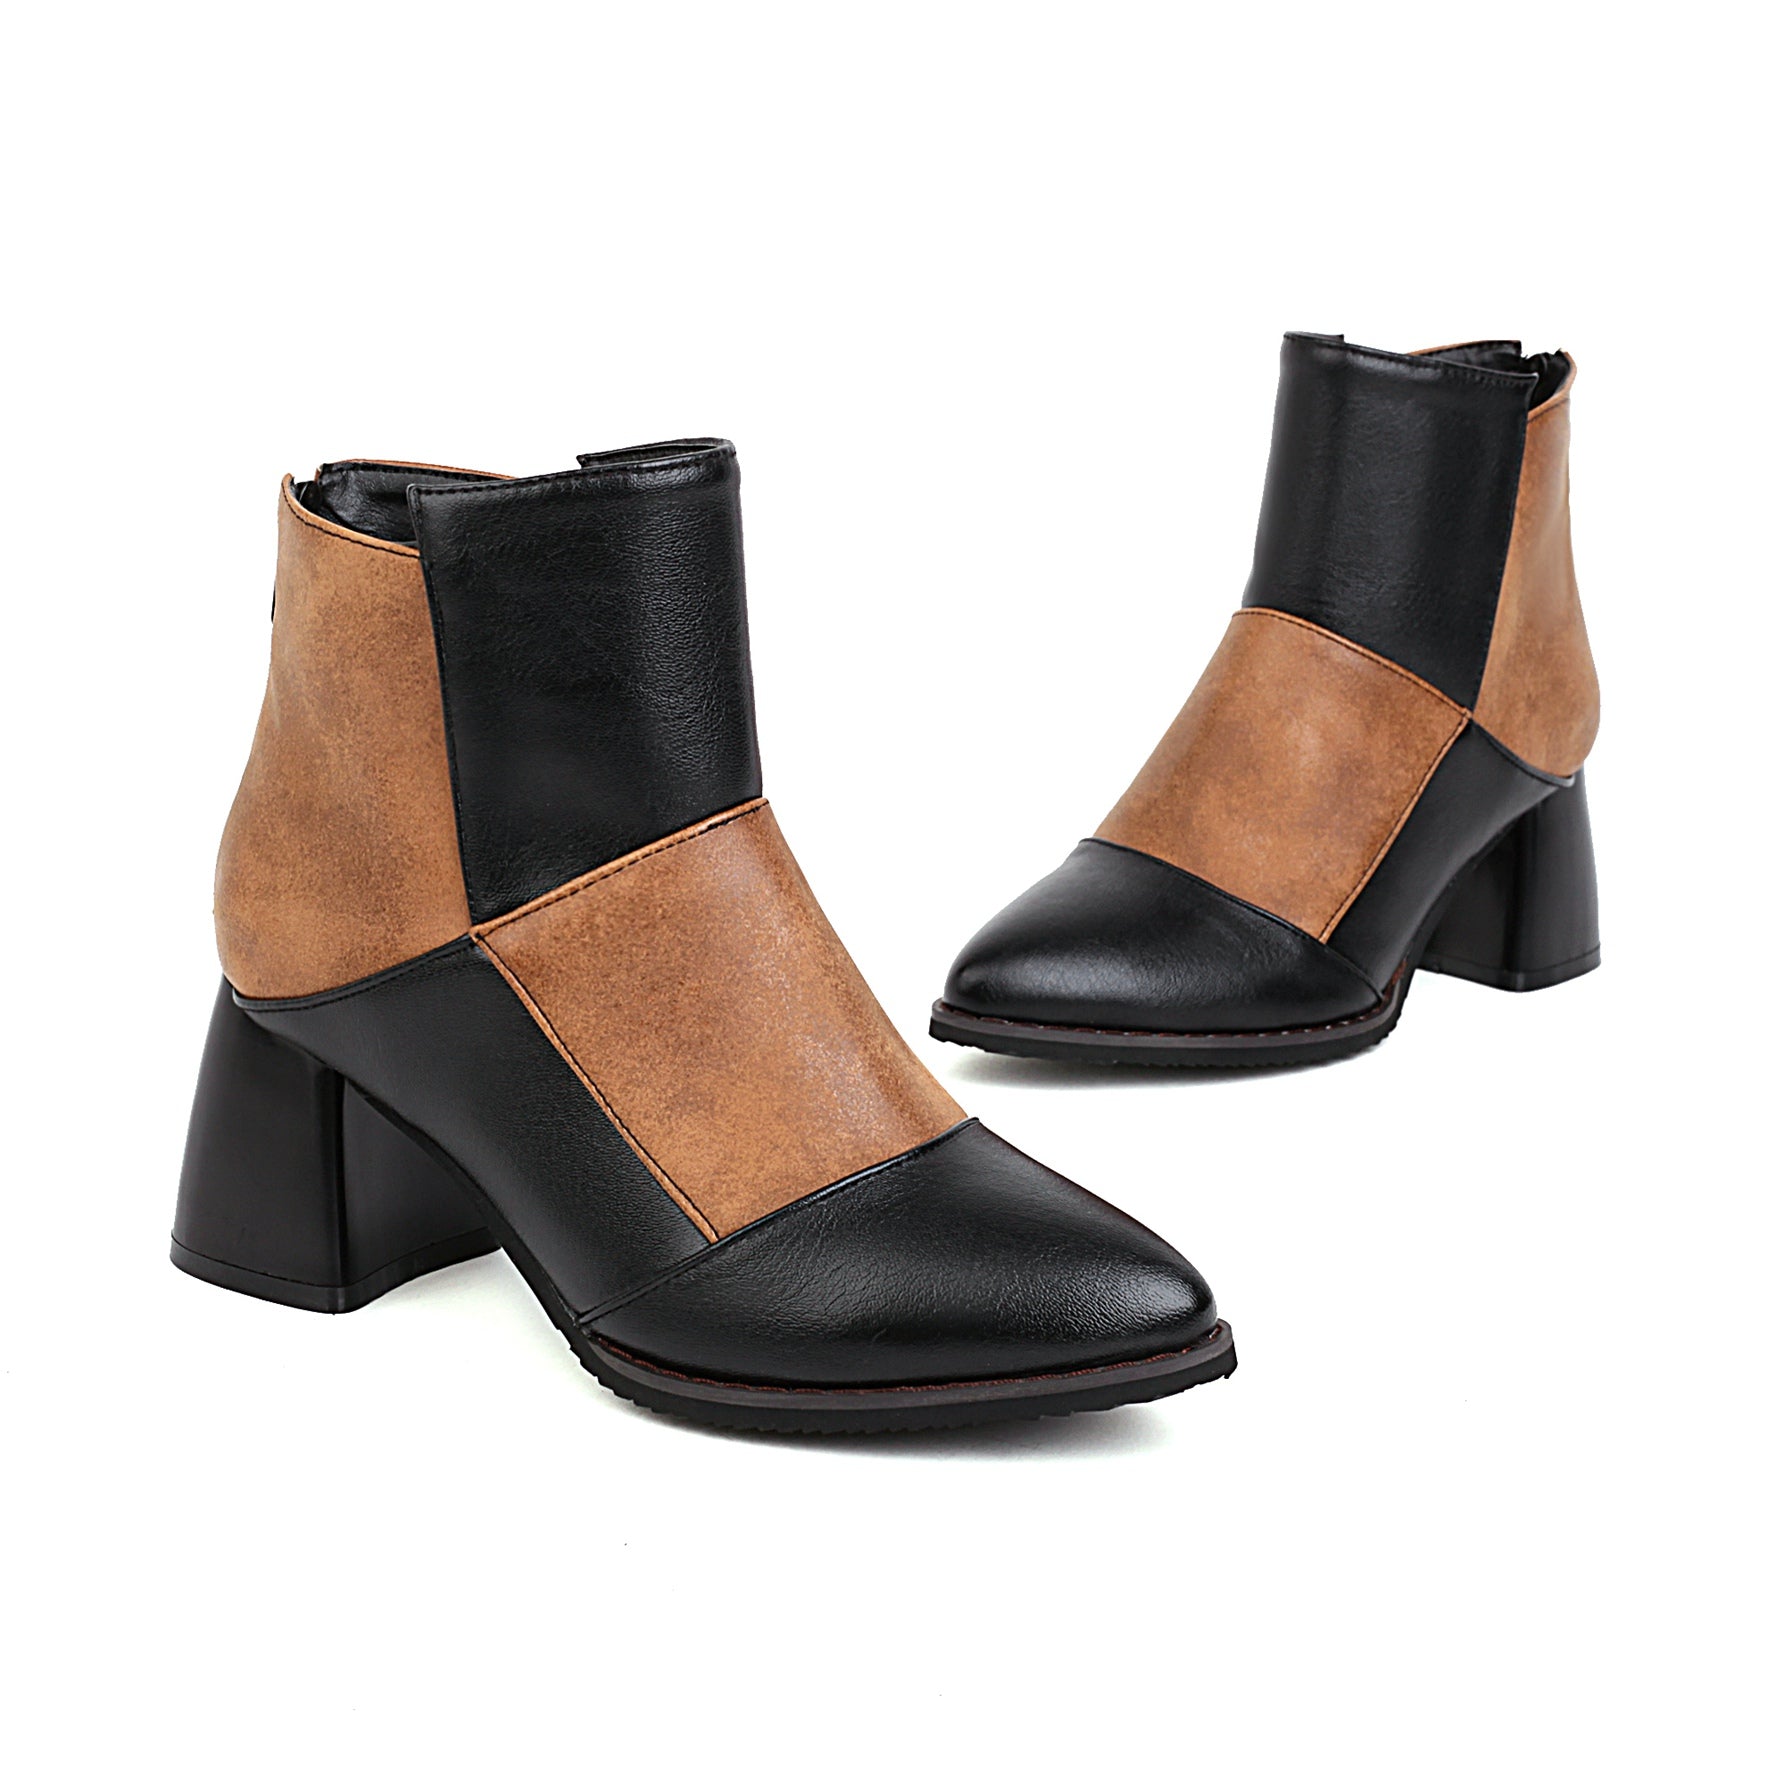 Bigsizeheels Retro thick heel Ankle Boots - Brown freeshipping - bigsizeheel®-size5-size15 -All Plus Sizes Available!